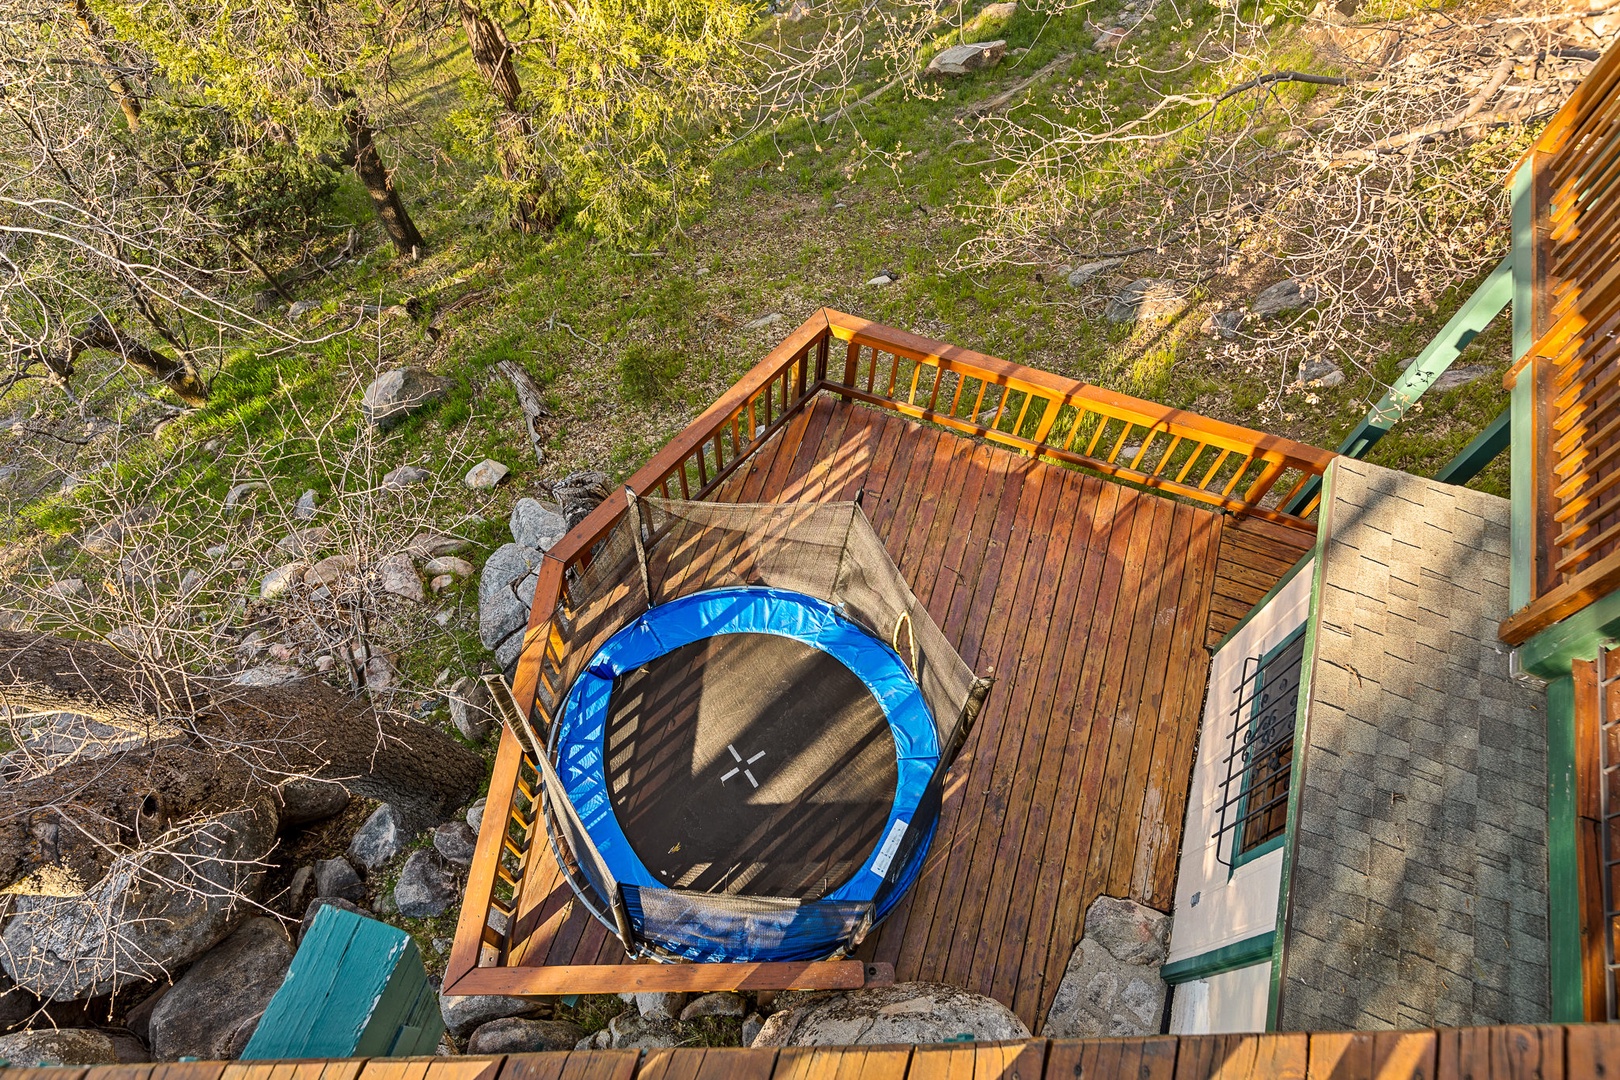 Take a leap on the enclosed trampoline with unbelievable views